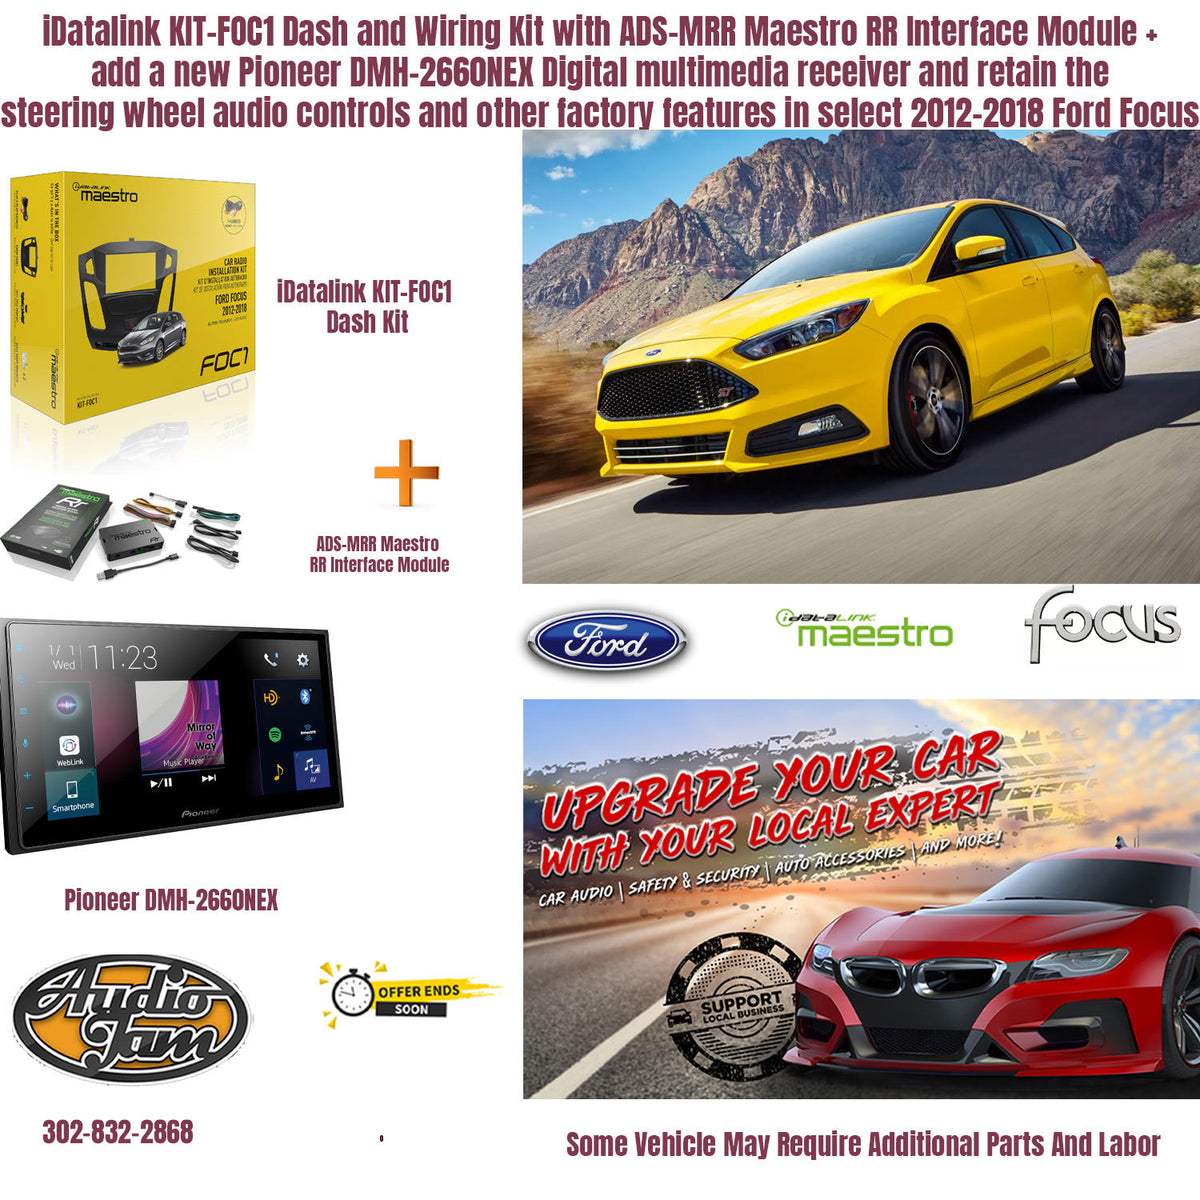 iDatalink KIT-FOC1 Dash and Wiring Kit with ADS-MRR Maestro RR Interface Module + add a new Pioneer DMH-2660NEX Digital multimedia receiver and retain the steering wheel audio controls and other factory features in select 2012-2018 Ford Focus